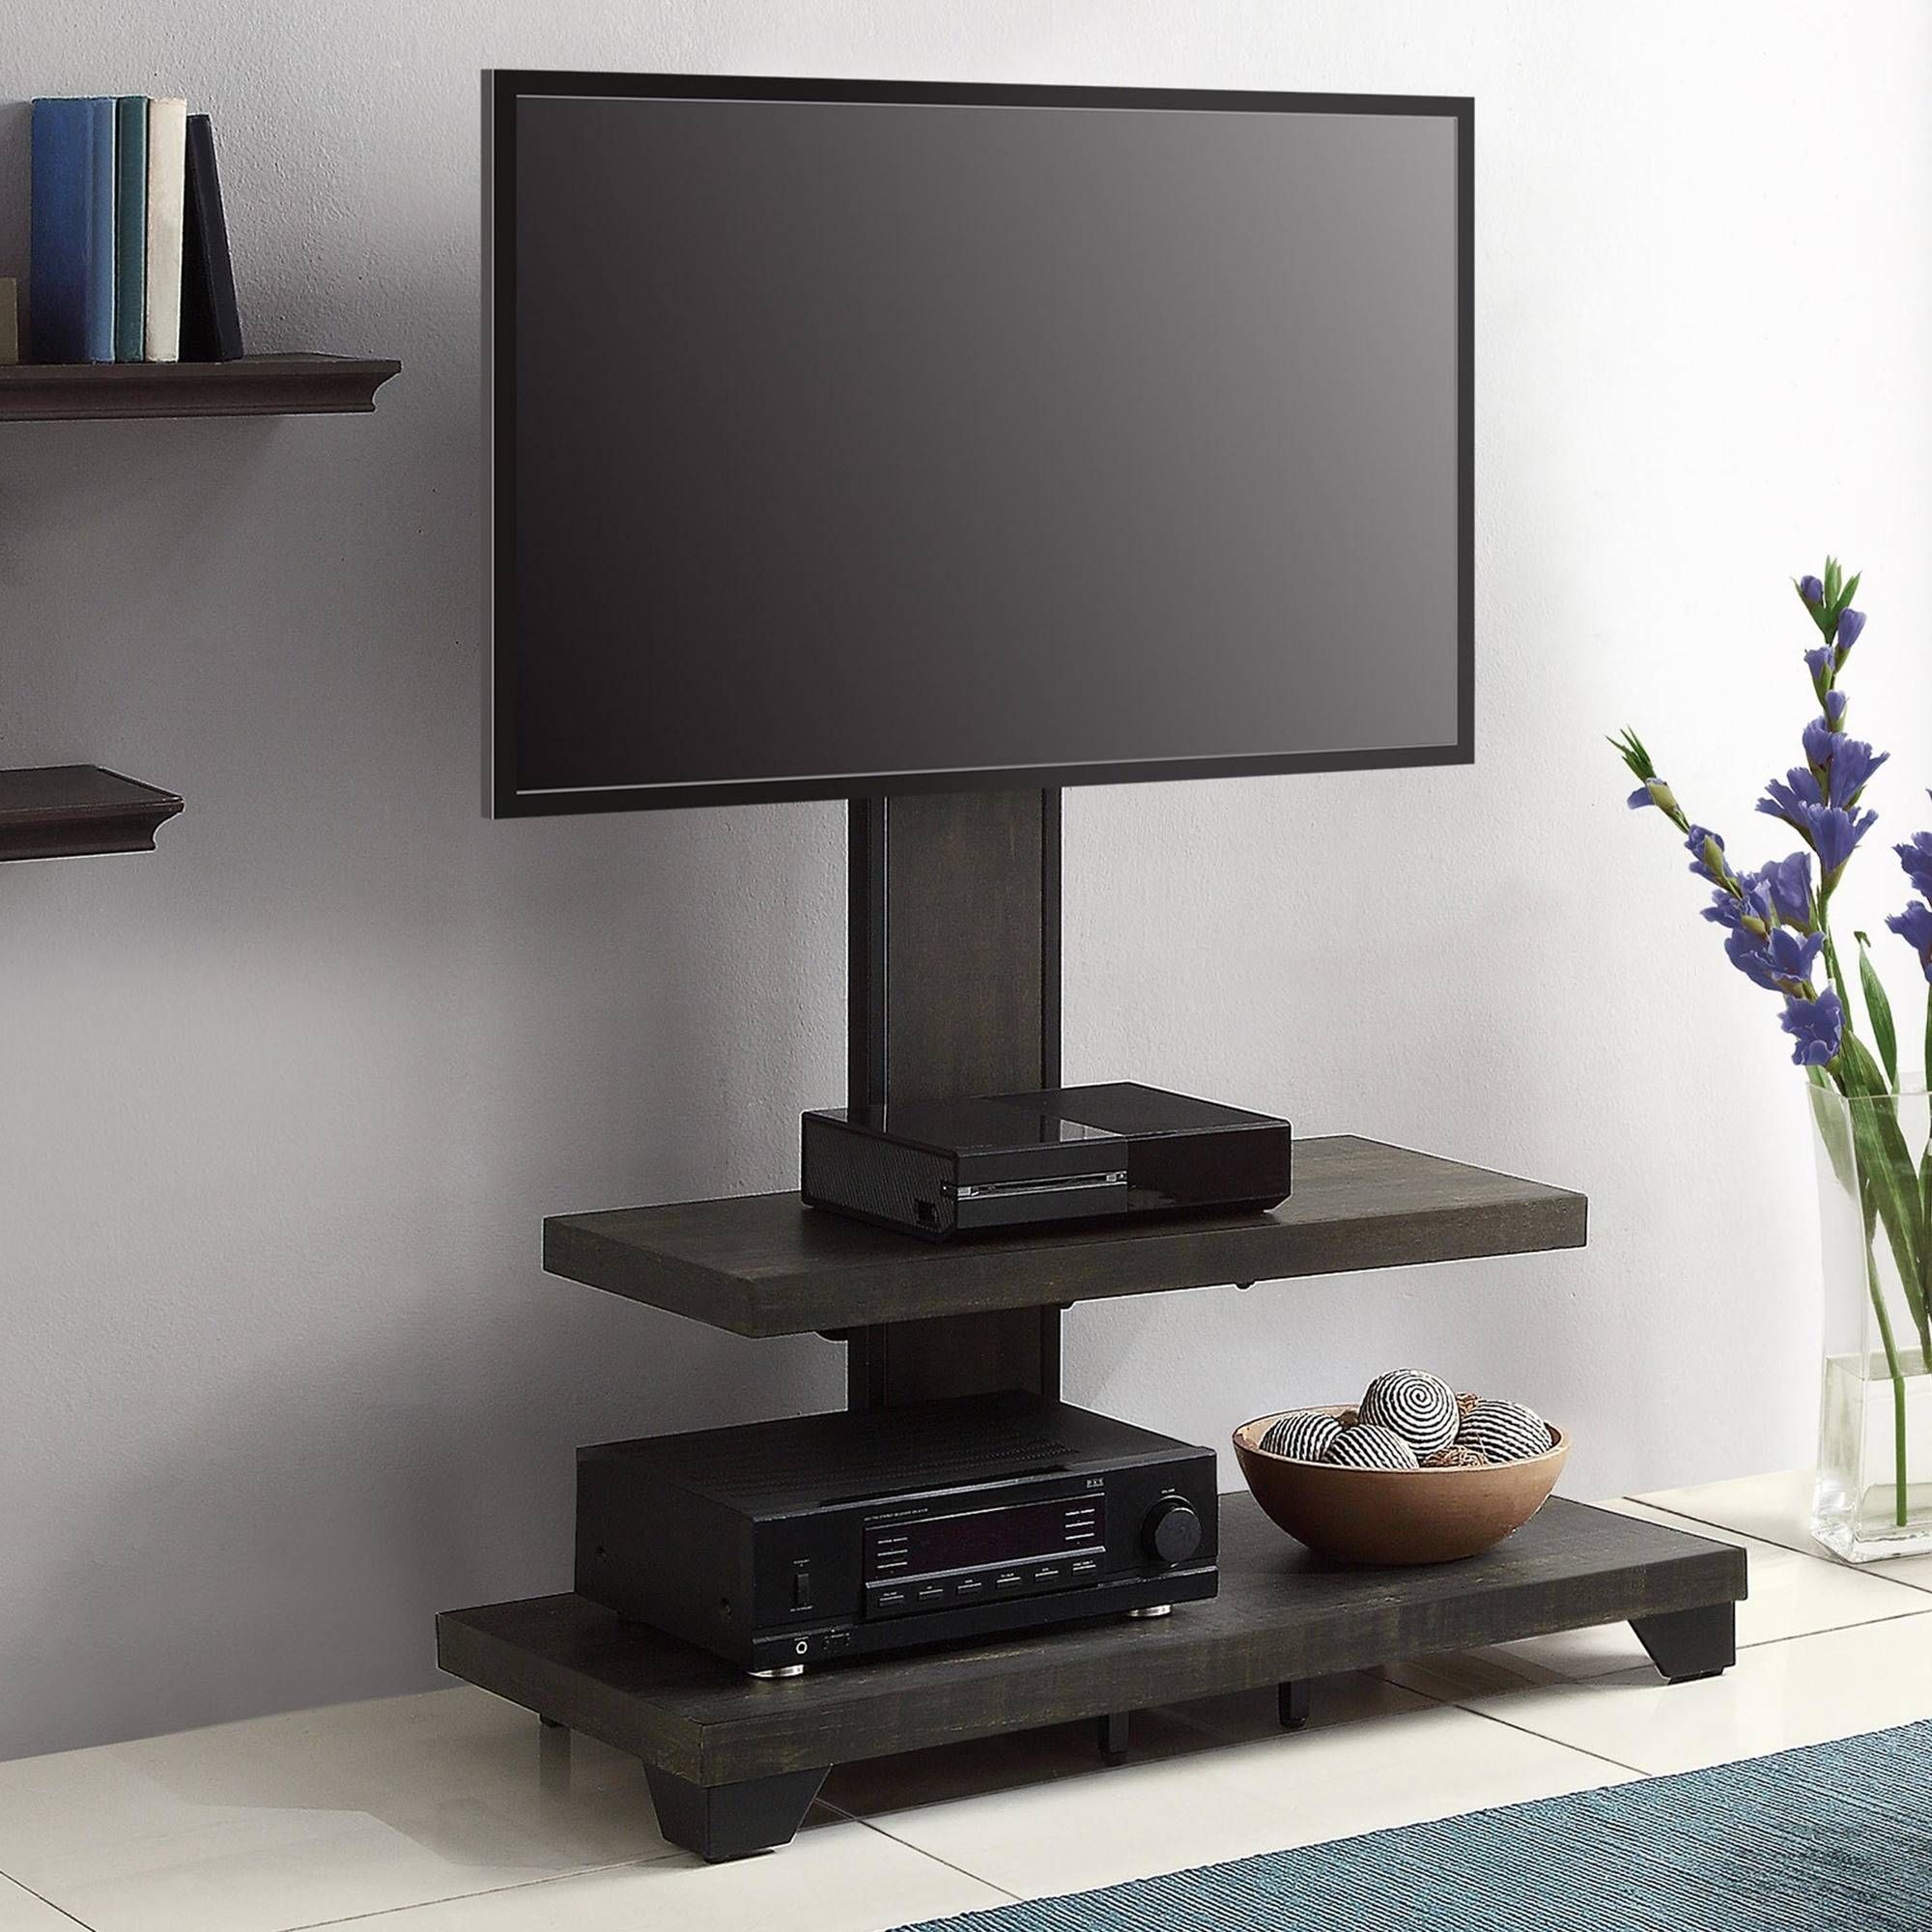 Tv Stand With Mount Swivel Ollieroo Floor Fitueyes Best – Buyouapp Within Vista 60 Inch Tv Stands (View 26 of 30)